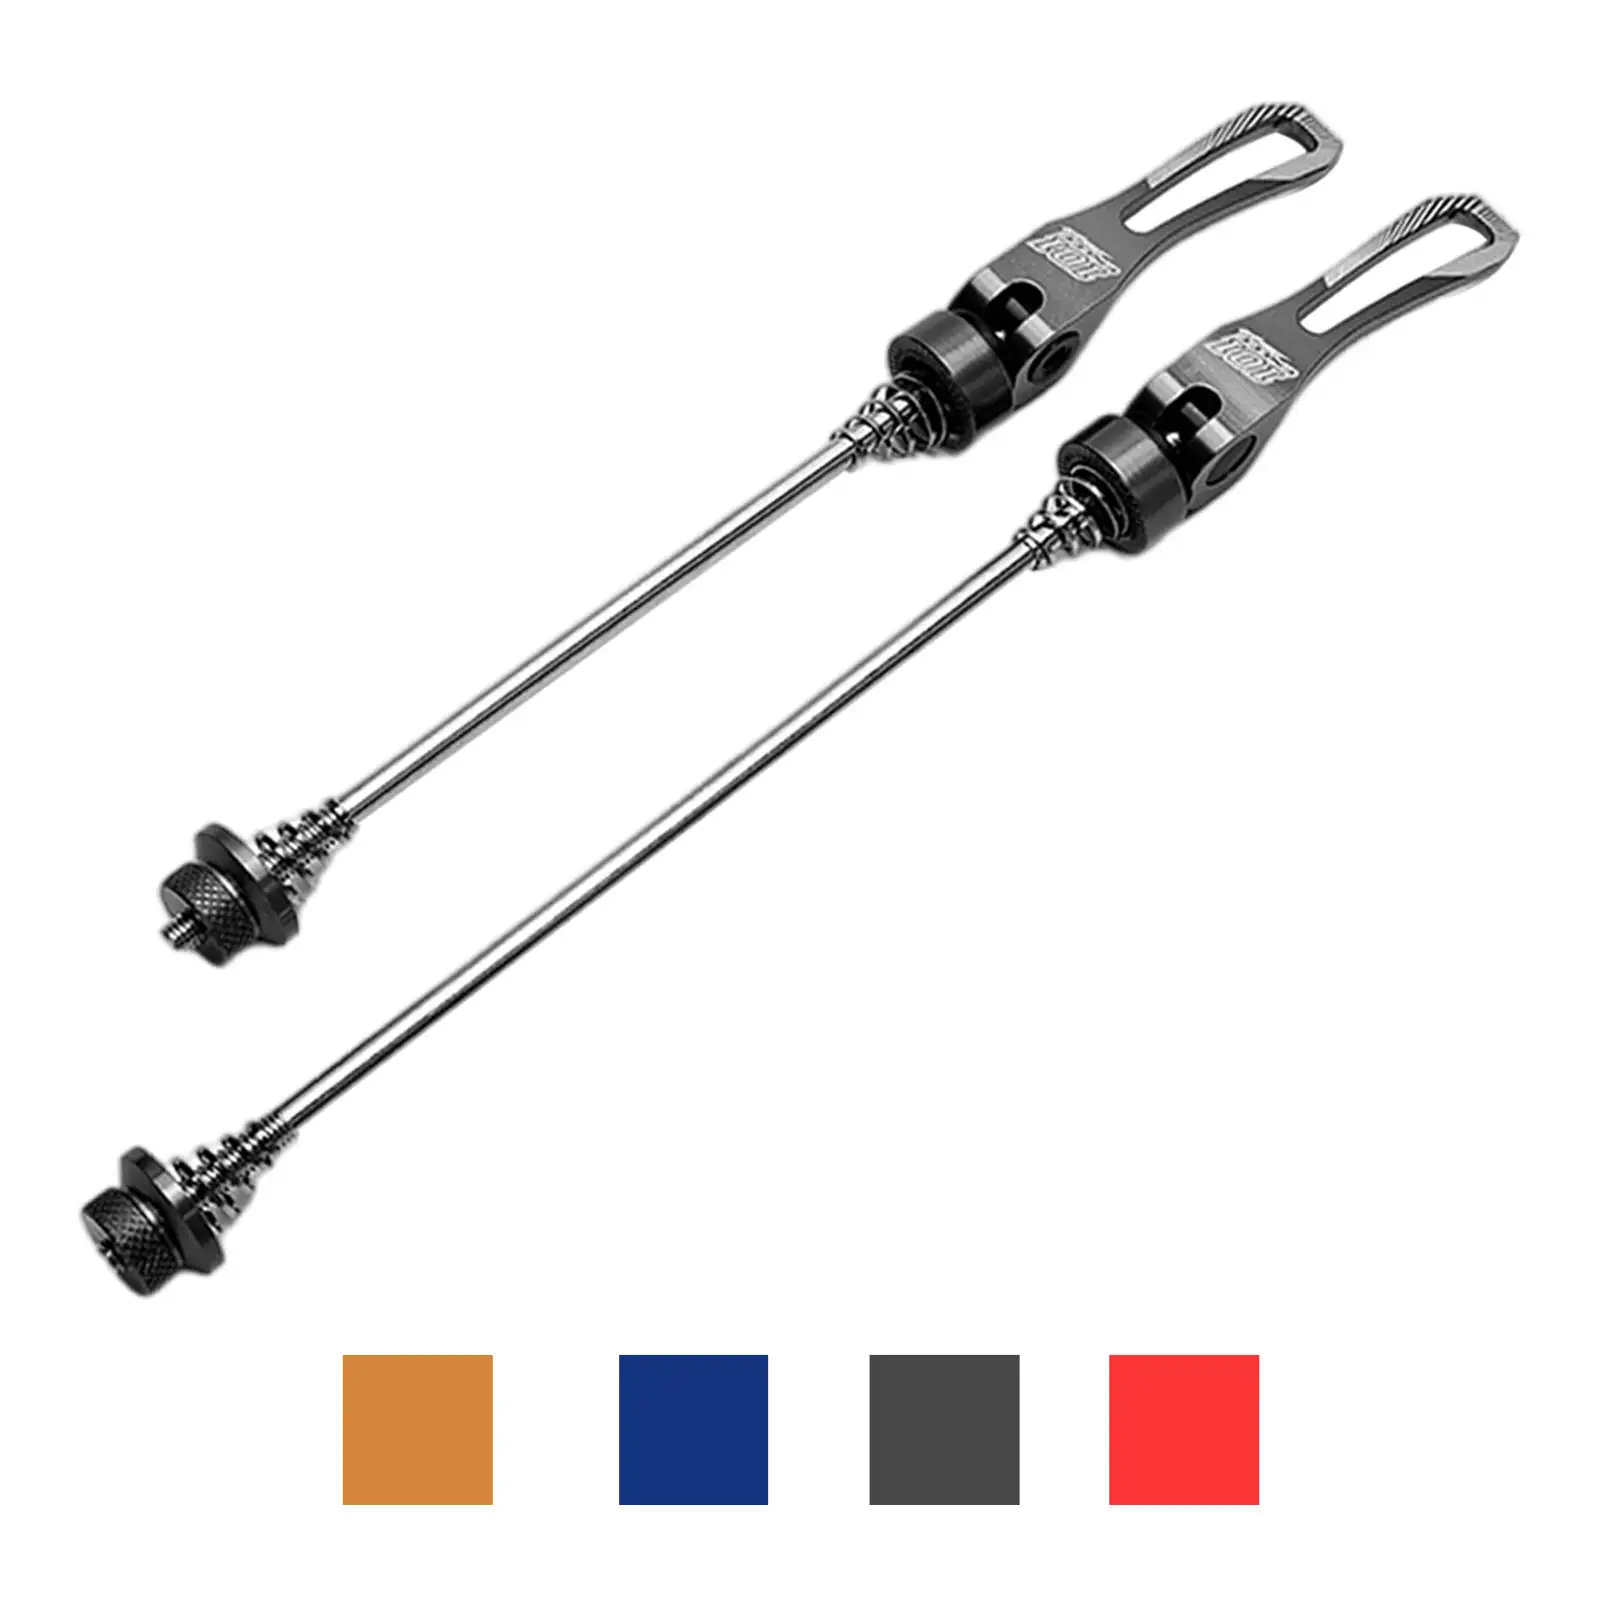 Lightweight Bike Quick Release Axle Skewer Clip Bolt Lever High Strength for Bicycle